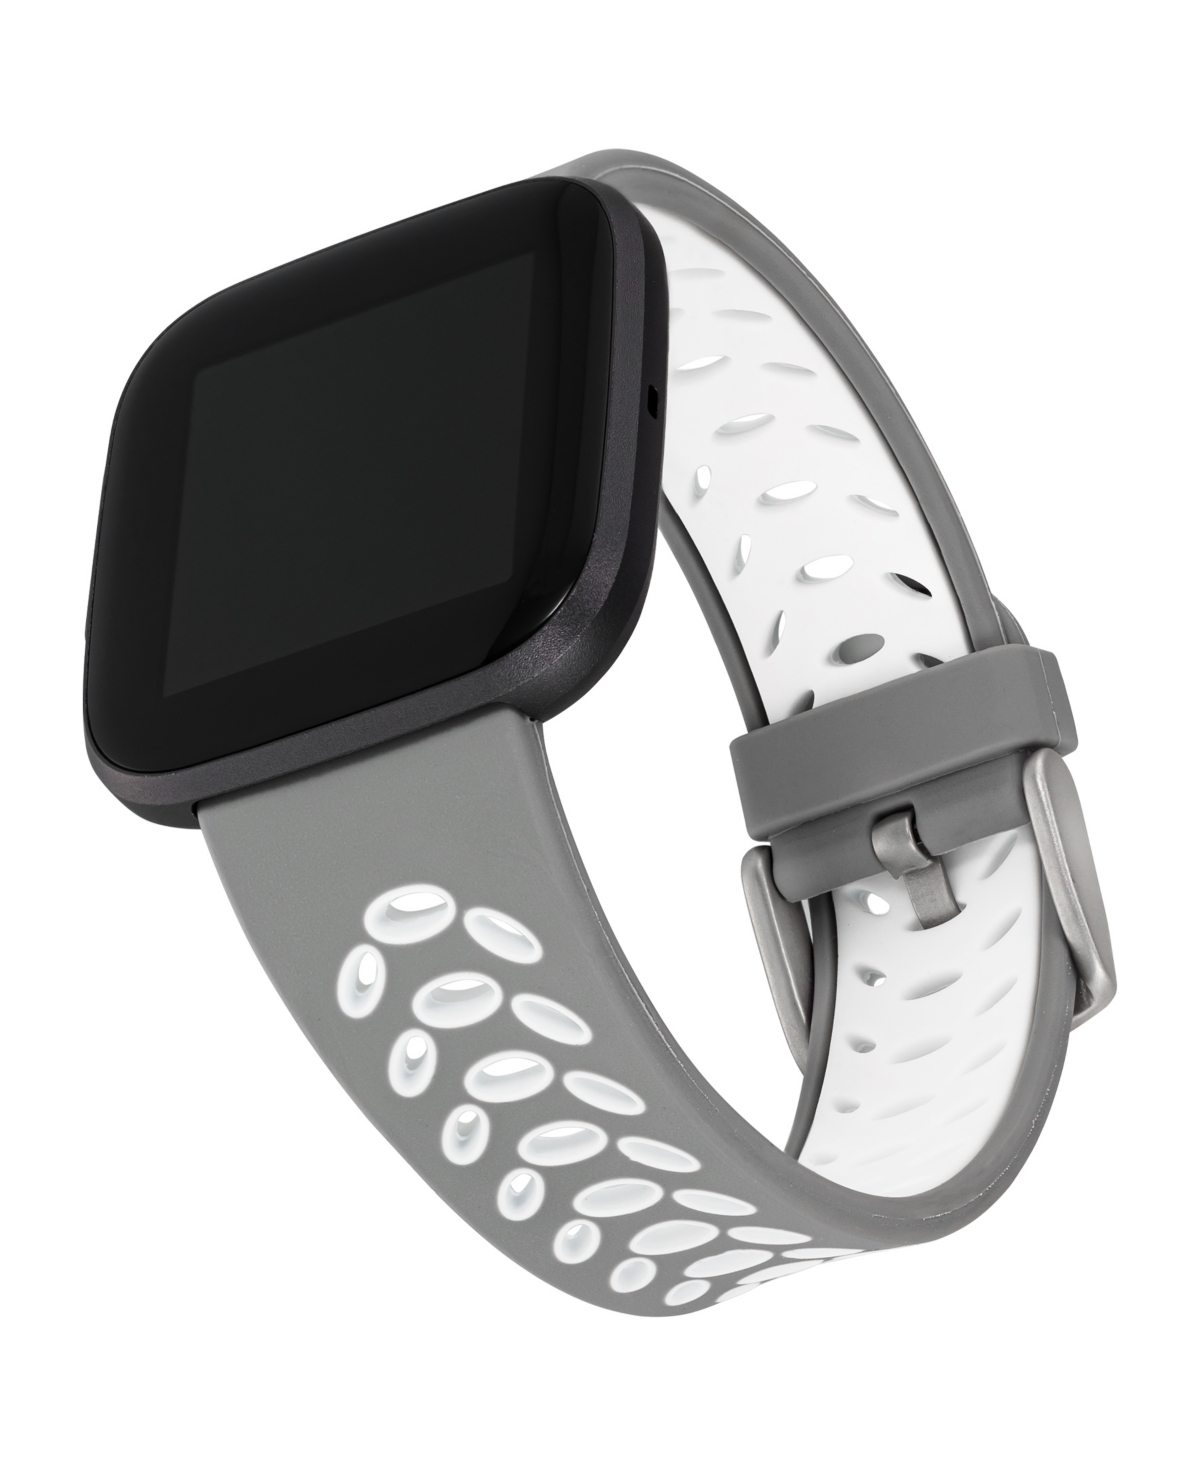 Gray and White Premium Sport Silicone Band Compatible with the Fitbit Versa and Fitbit Versa 2 - Gray, White